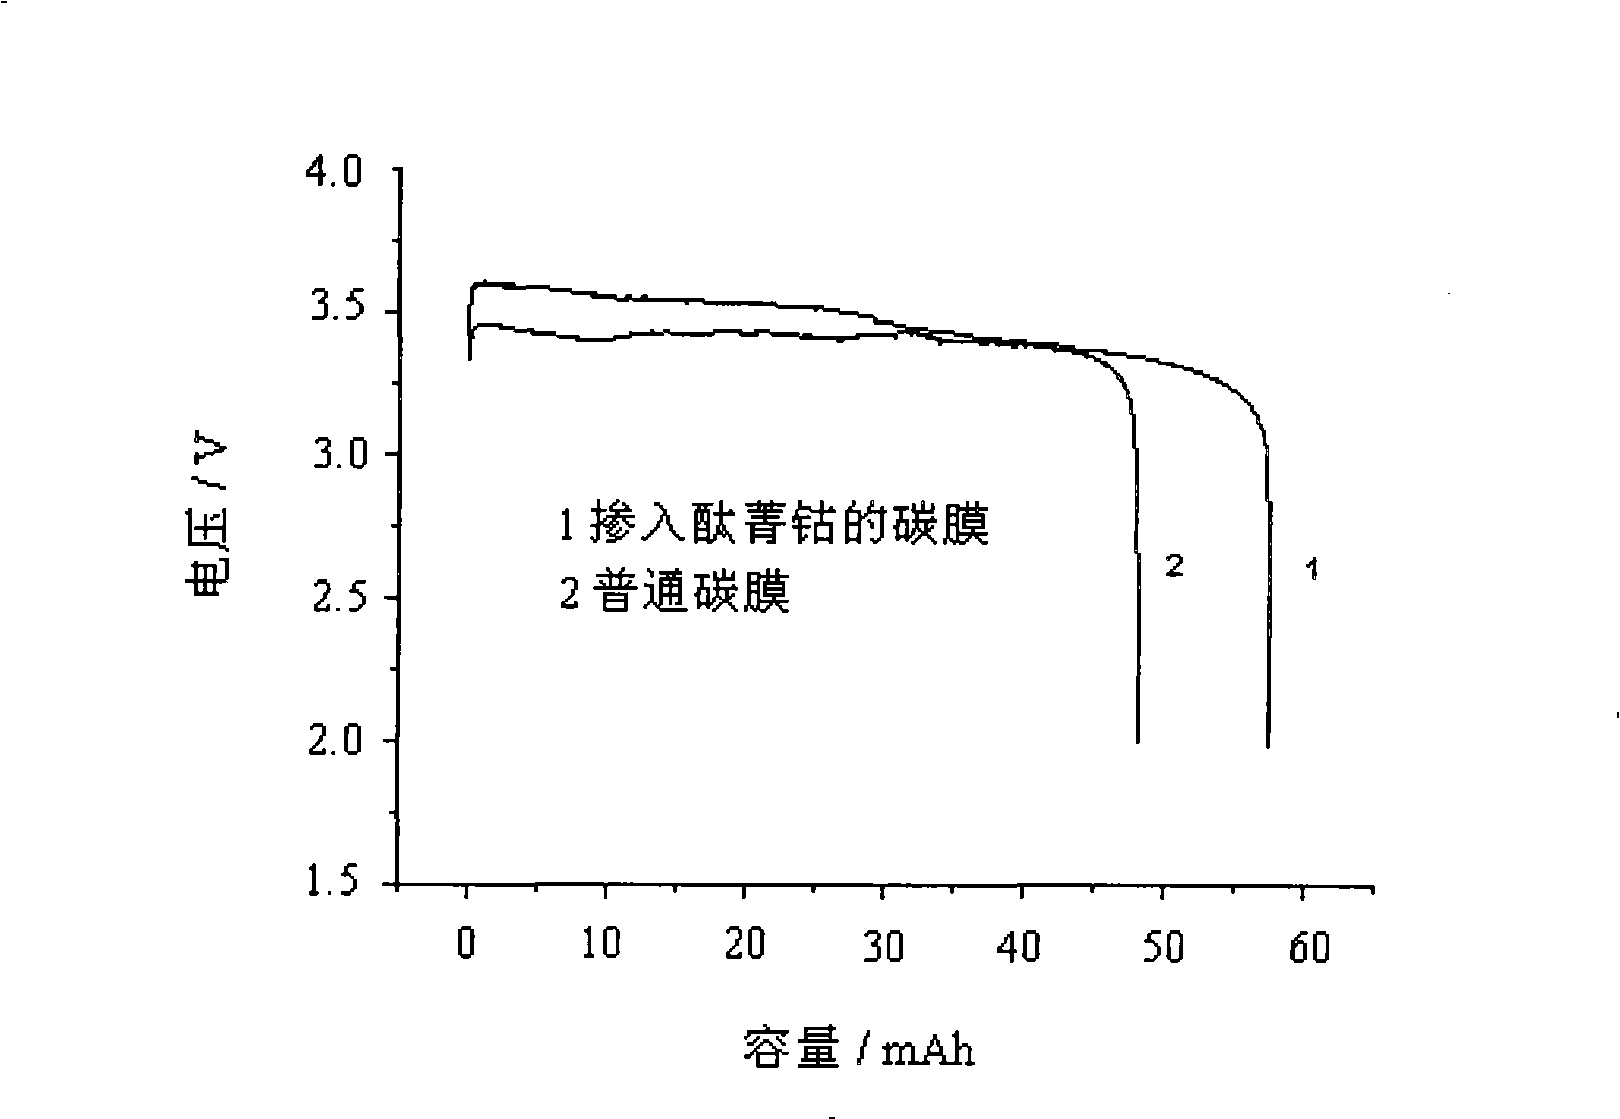 Lithium/thionyl chloride(Li/SOCl2) battery containing bromine chloride